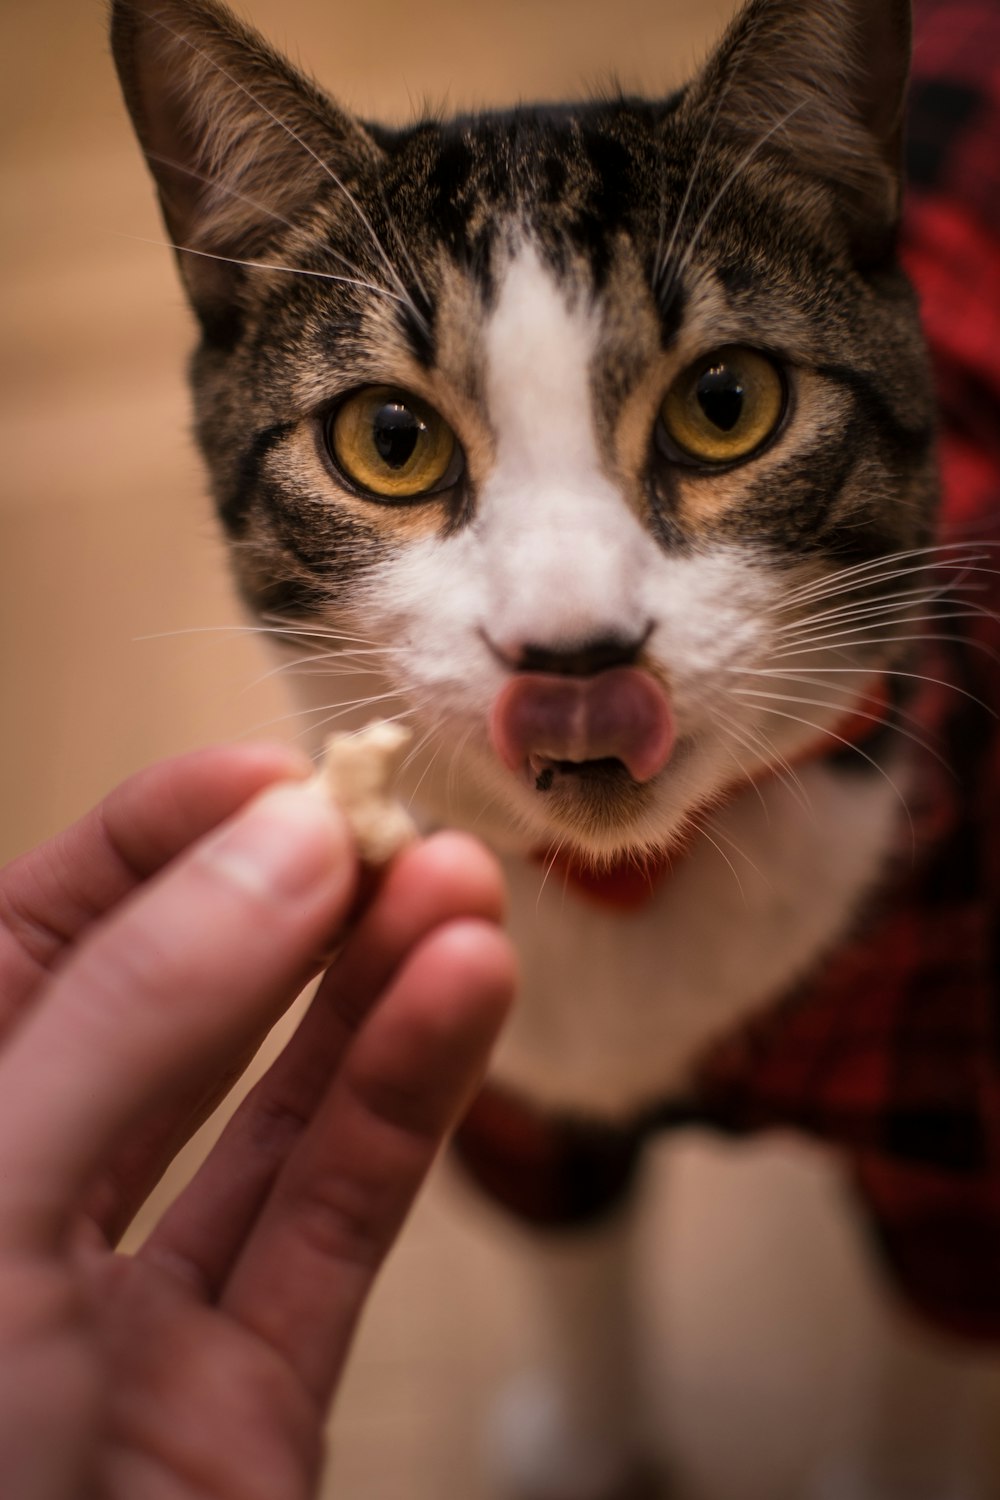 a person feeding a cat a piece of food